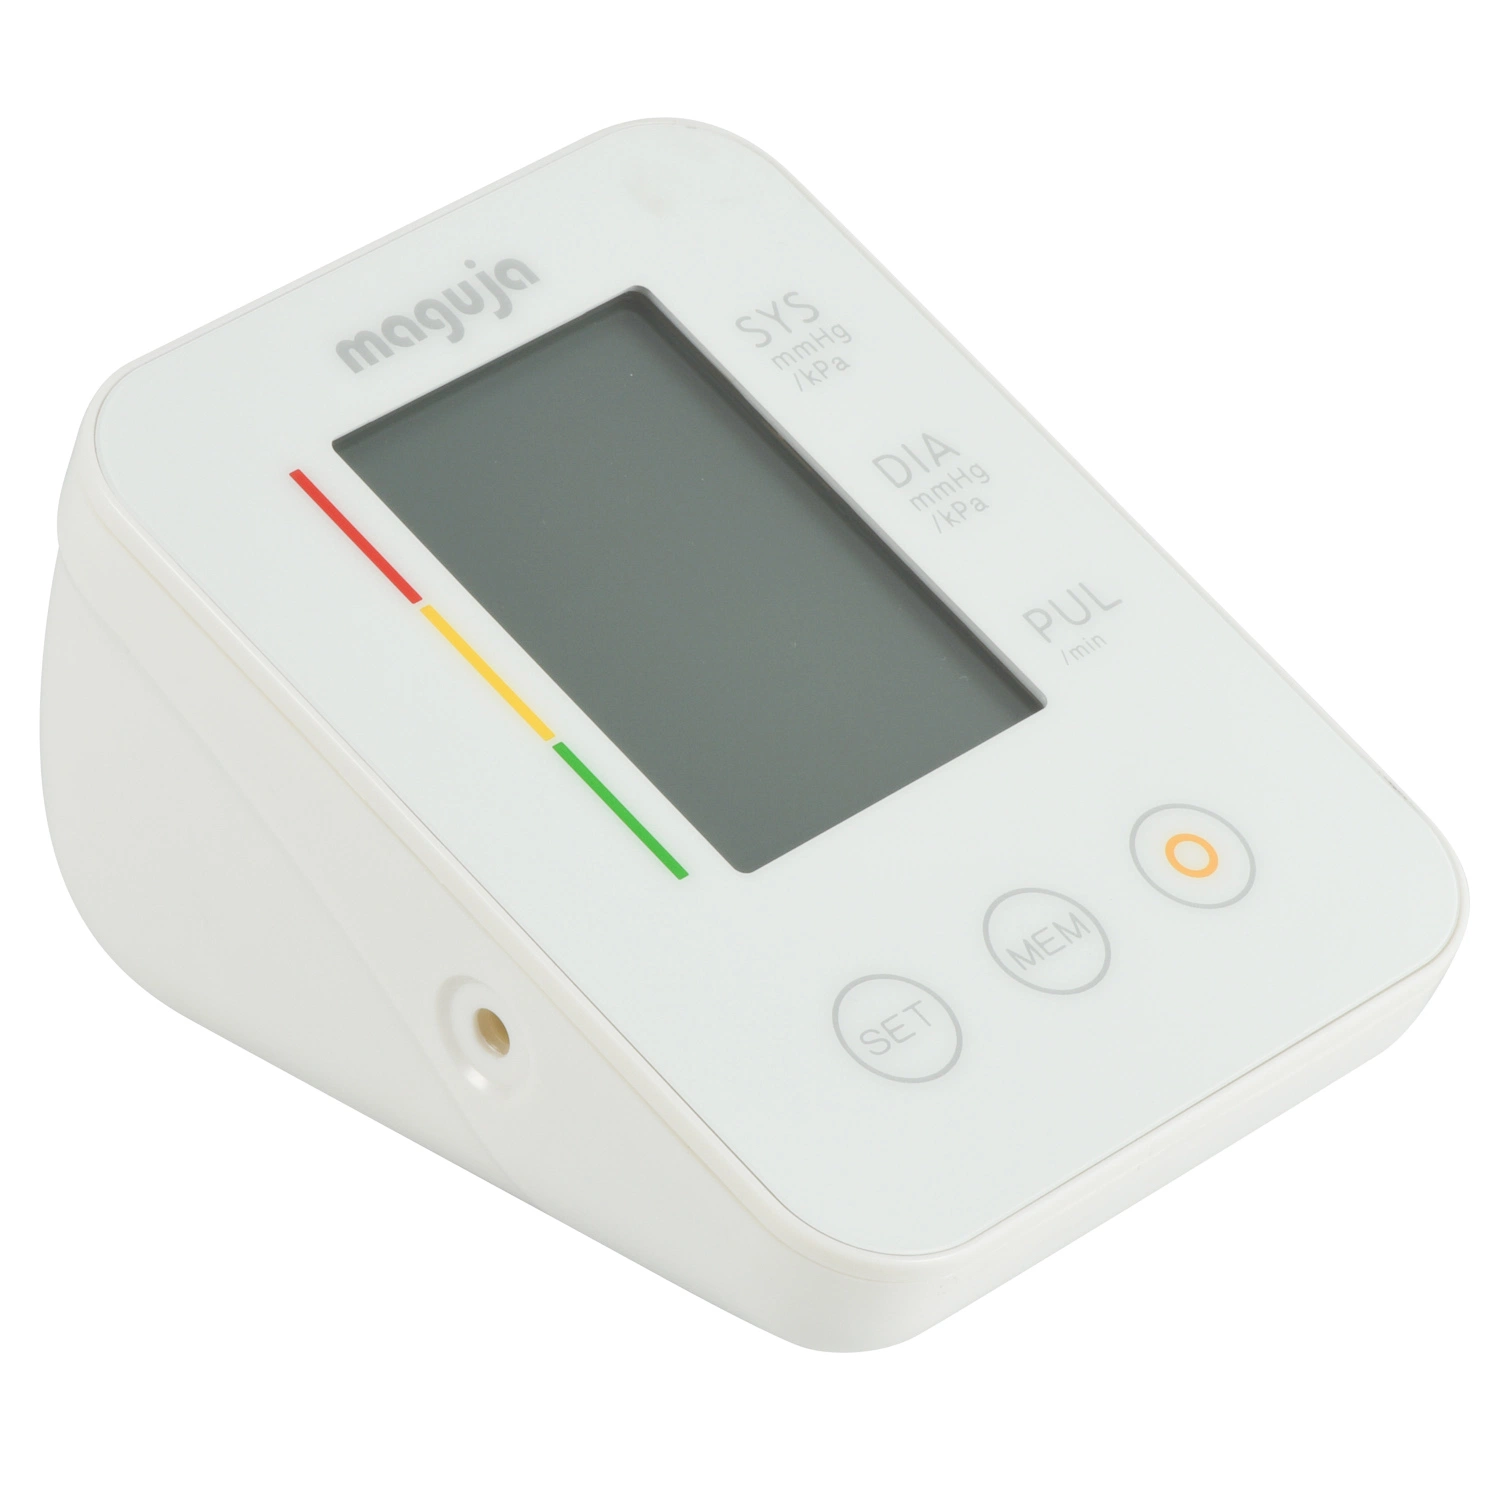 LCD Health Care Bp Monitor Upper Arm Type FDA CE (MDR) Approved Digital Blood Pressure Monitor